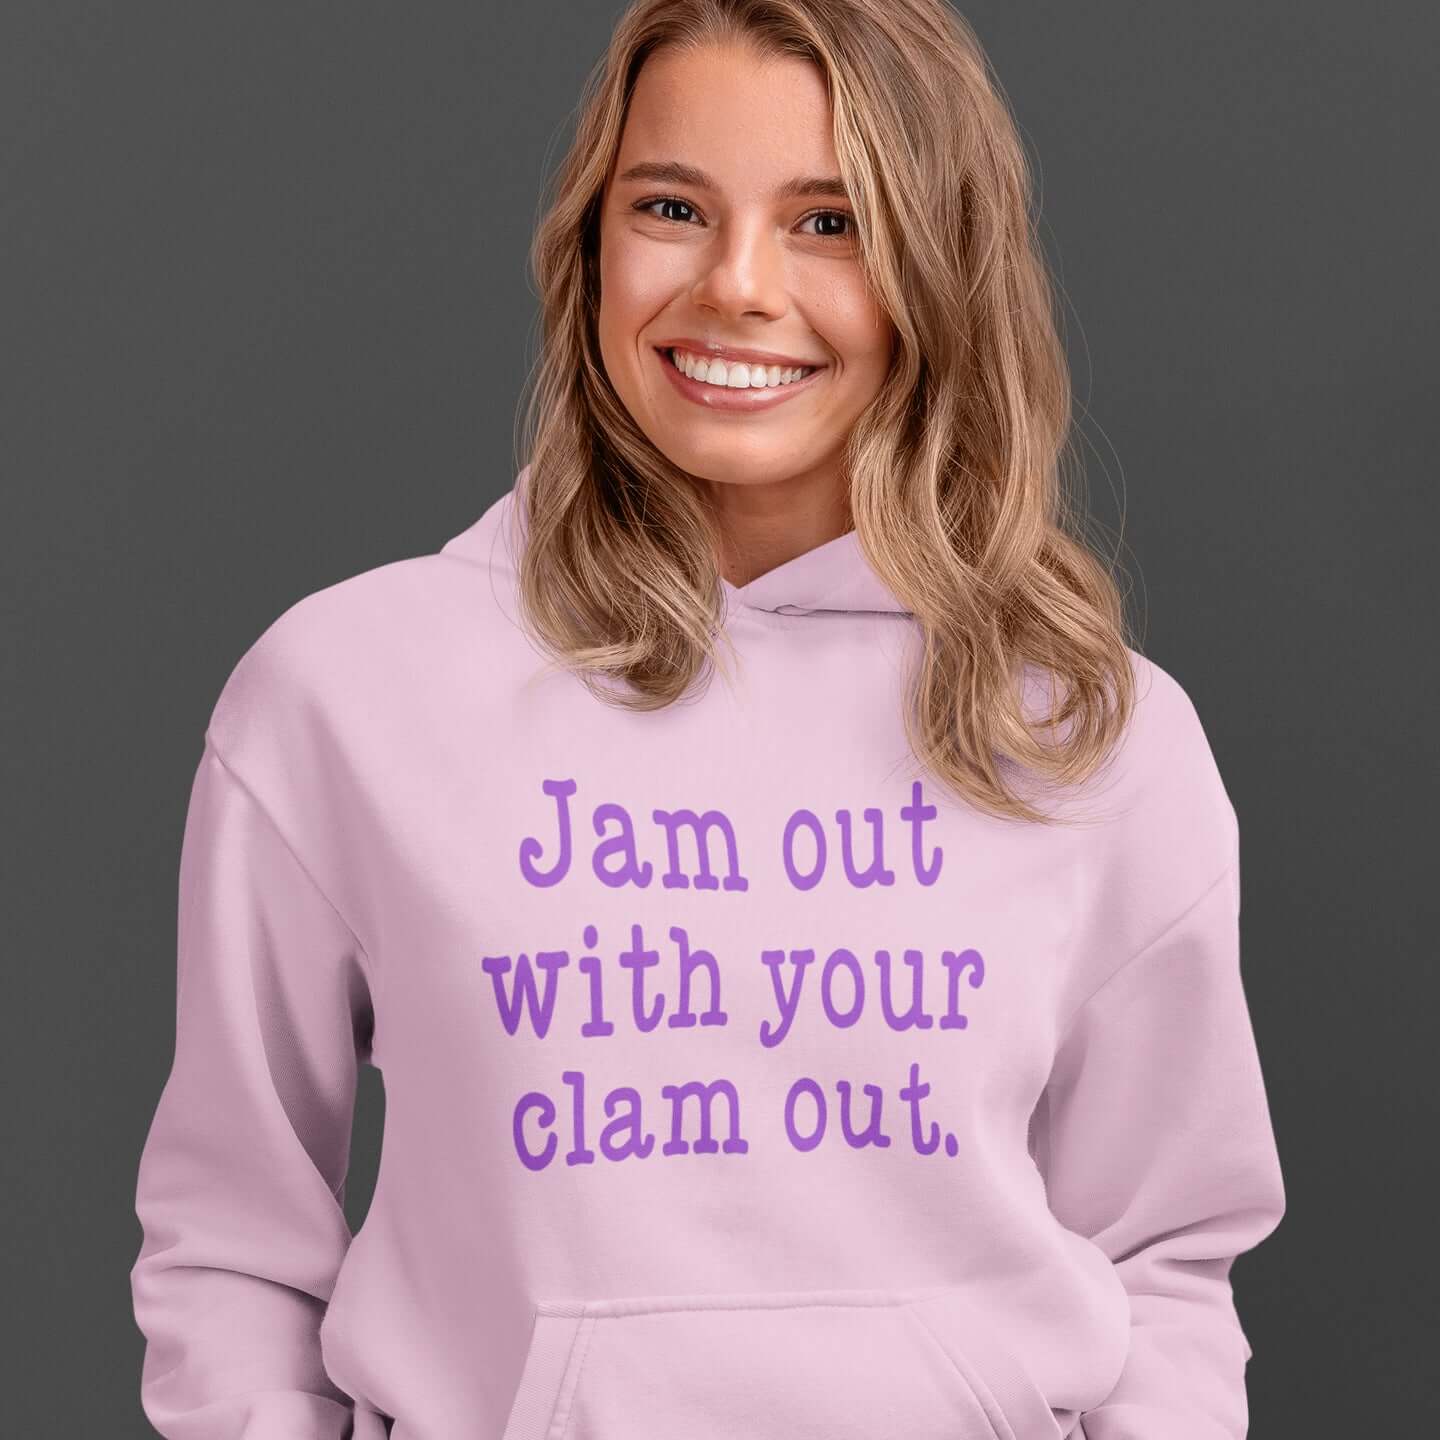 Woman wearing light pink hoodie sweatshirt with the phrase Jam out with your clam out printed on the front in purple.